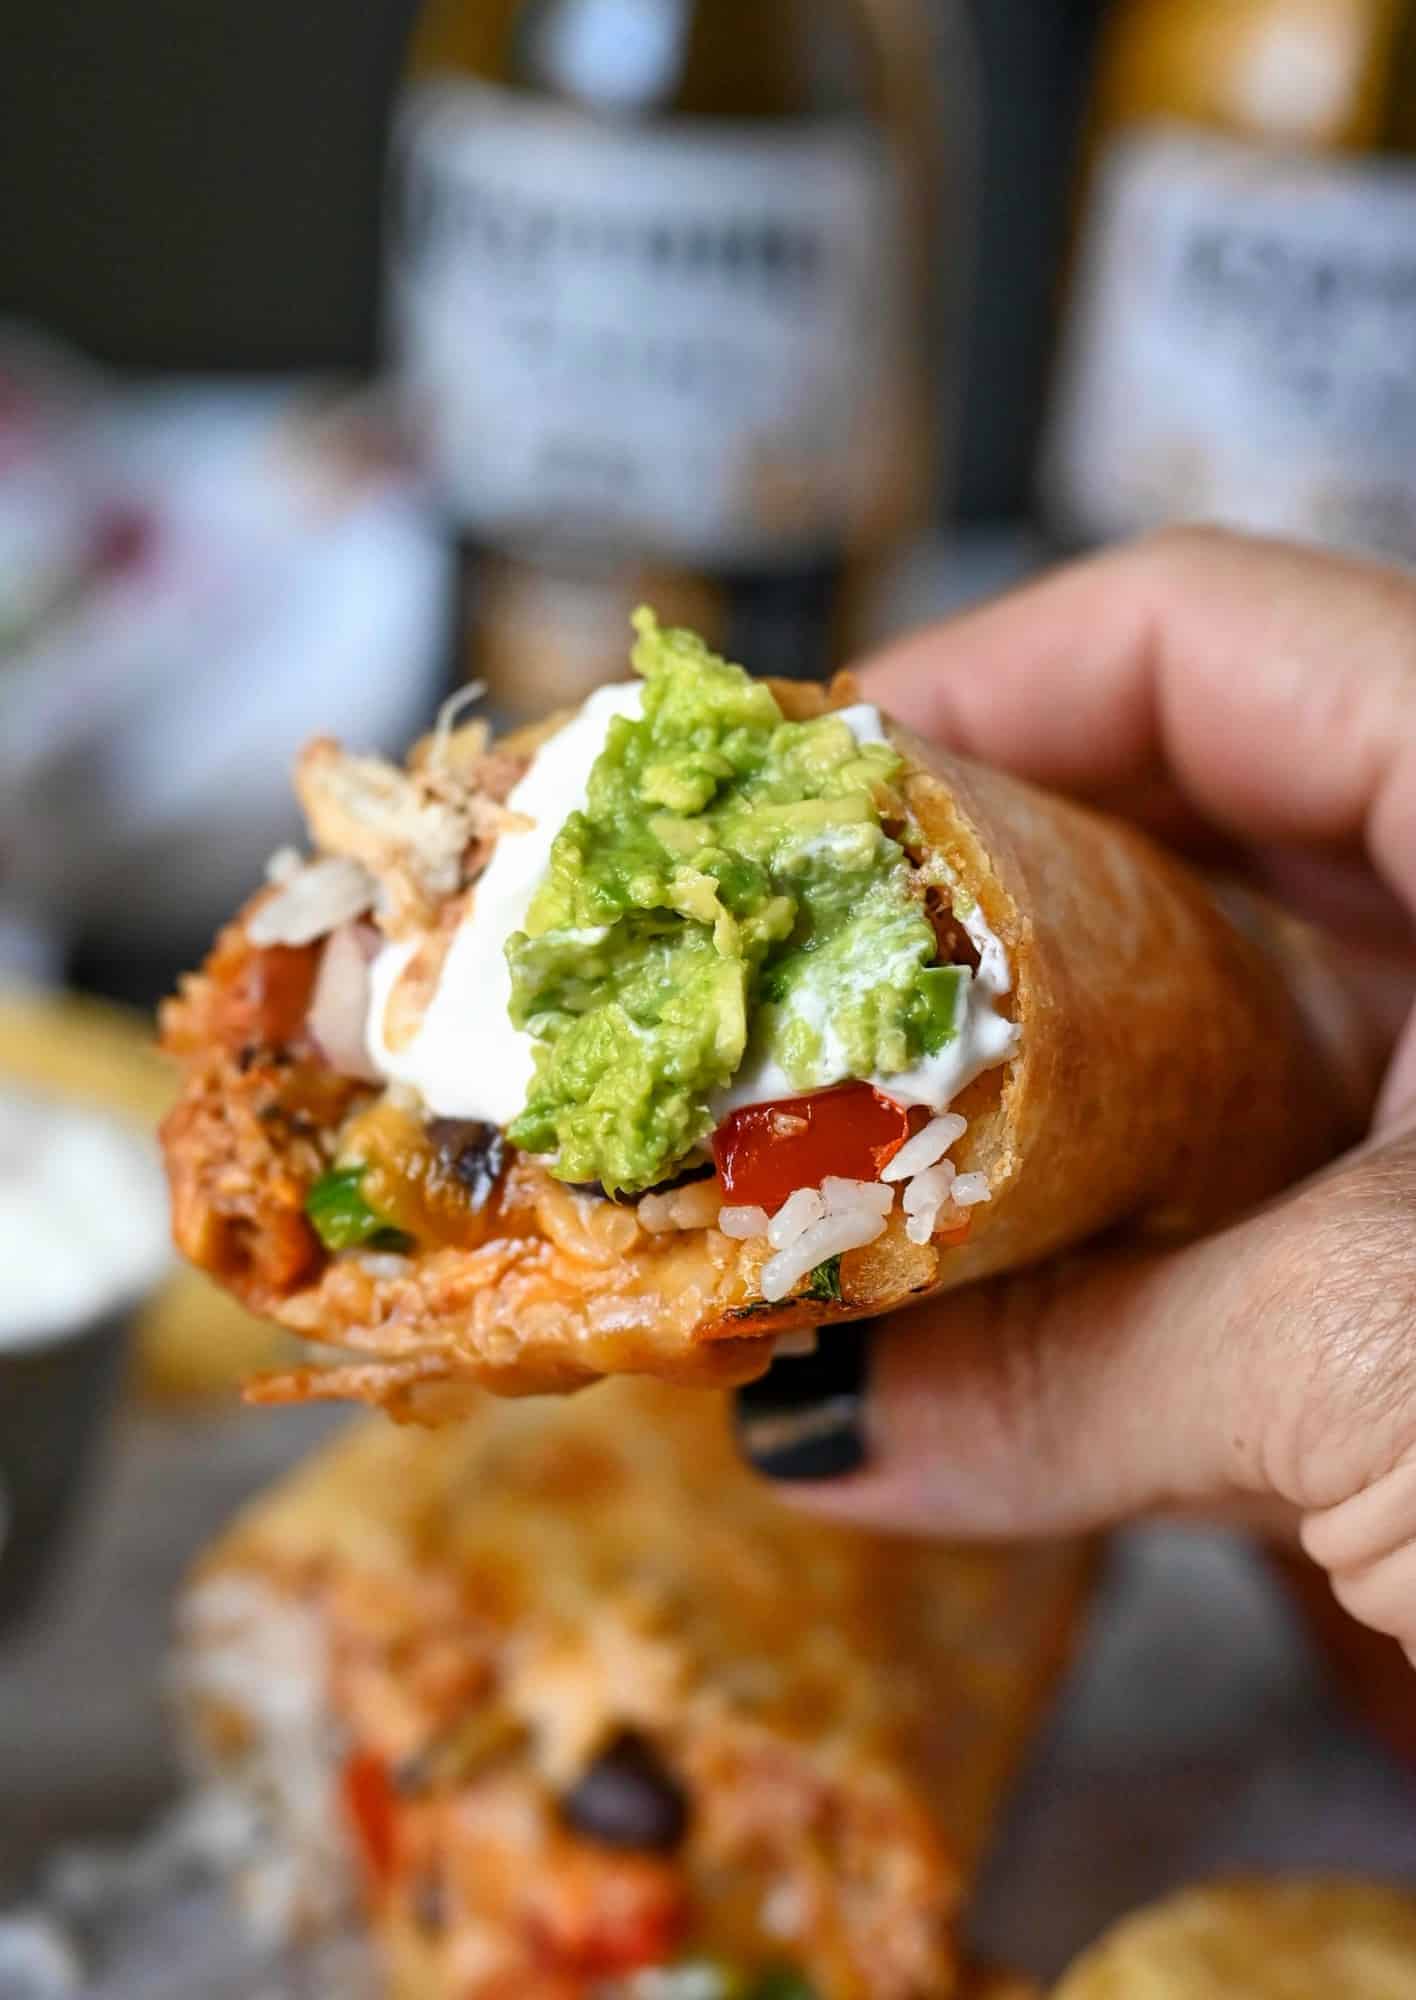 Slow cooker chicken burrito cut in half. Held in one hand with guacamole and sour cream on the end.